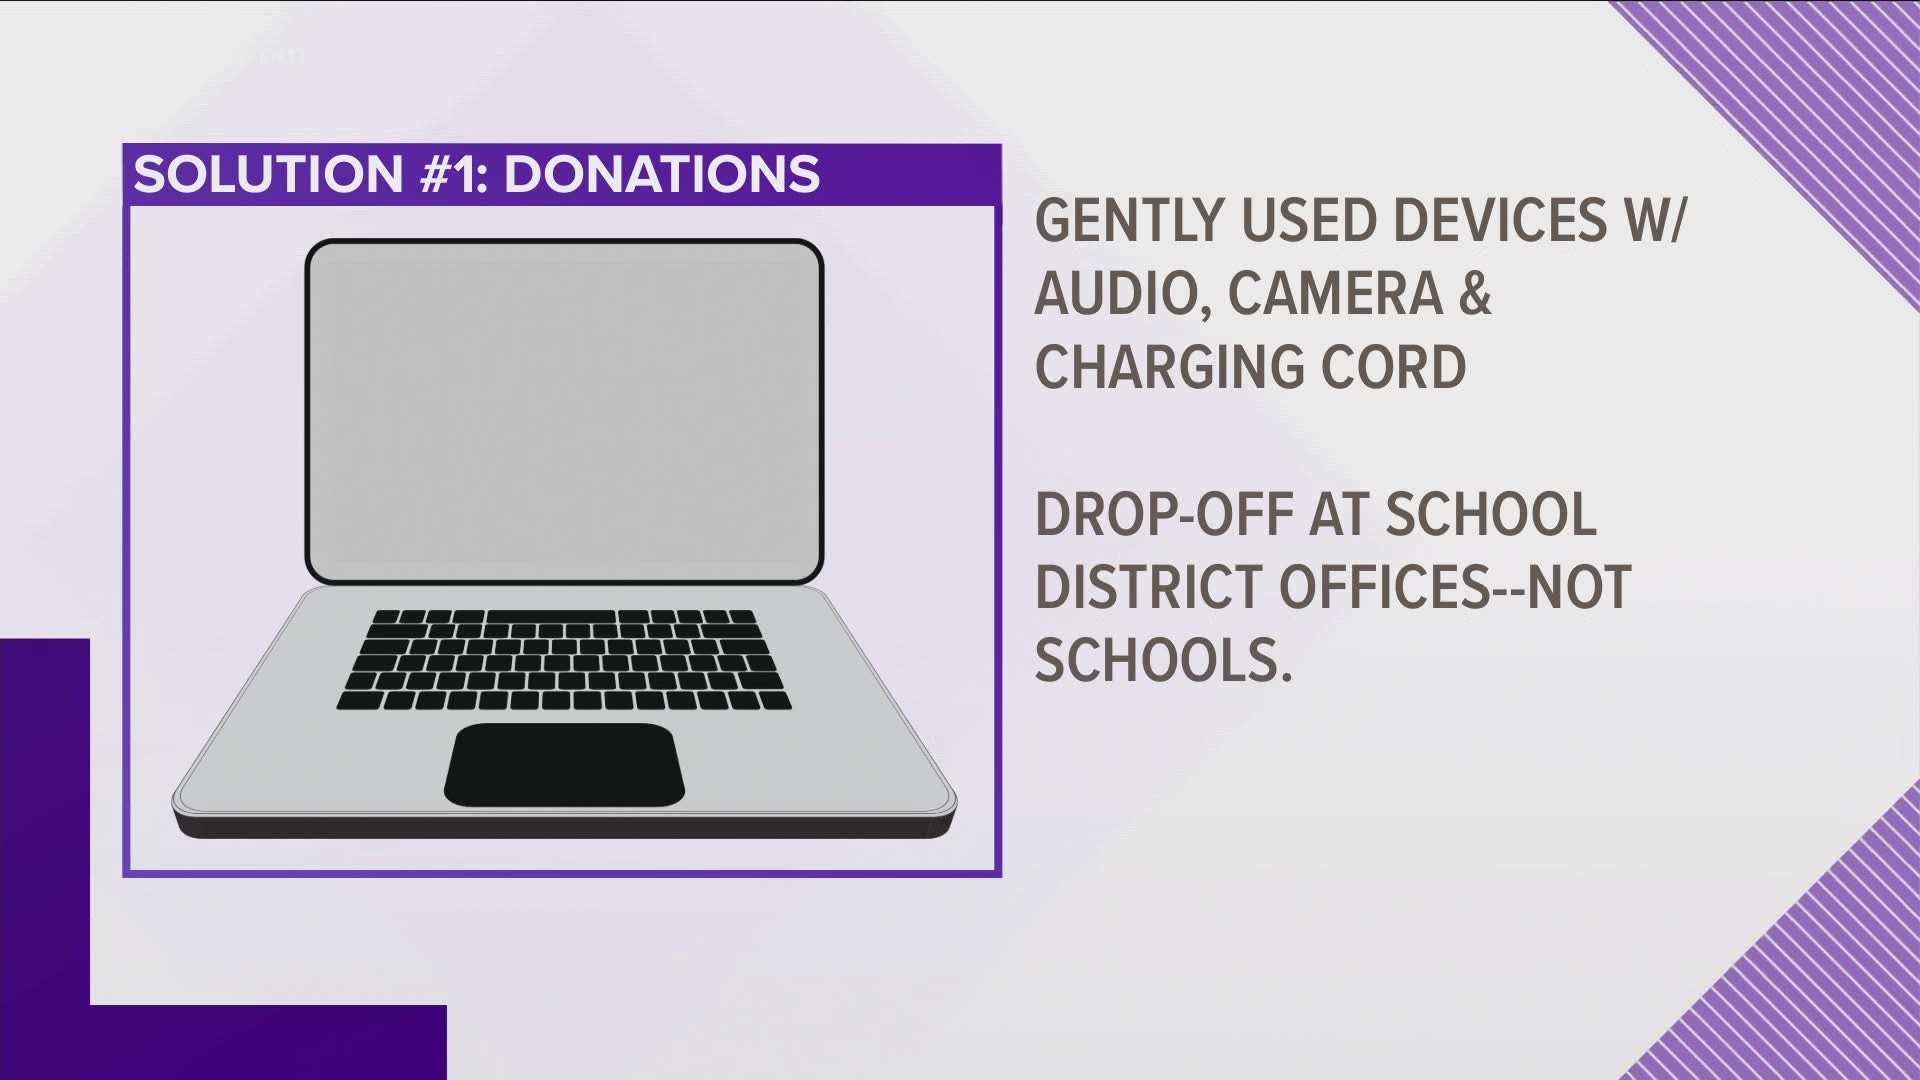 There are about 5,200 children in the school district without a device at home. GCS is asking the community to donate gently used devices they no longer need.